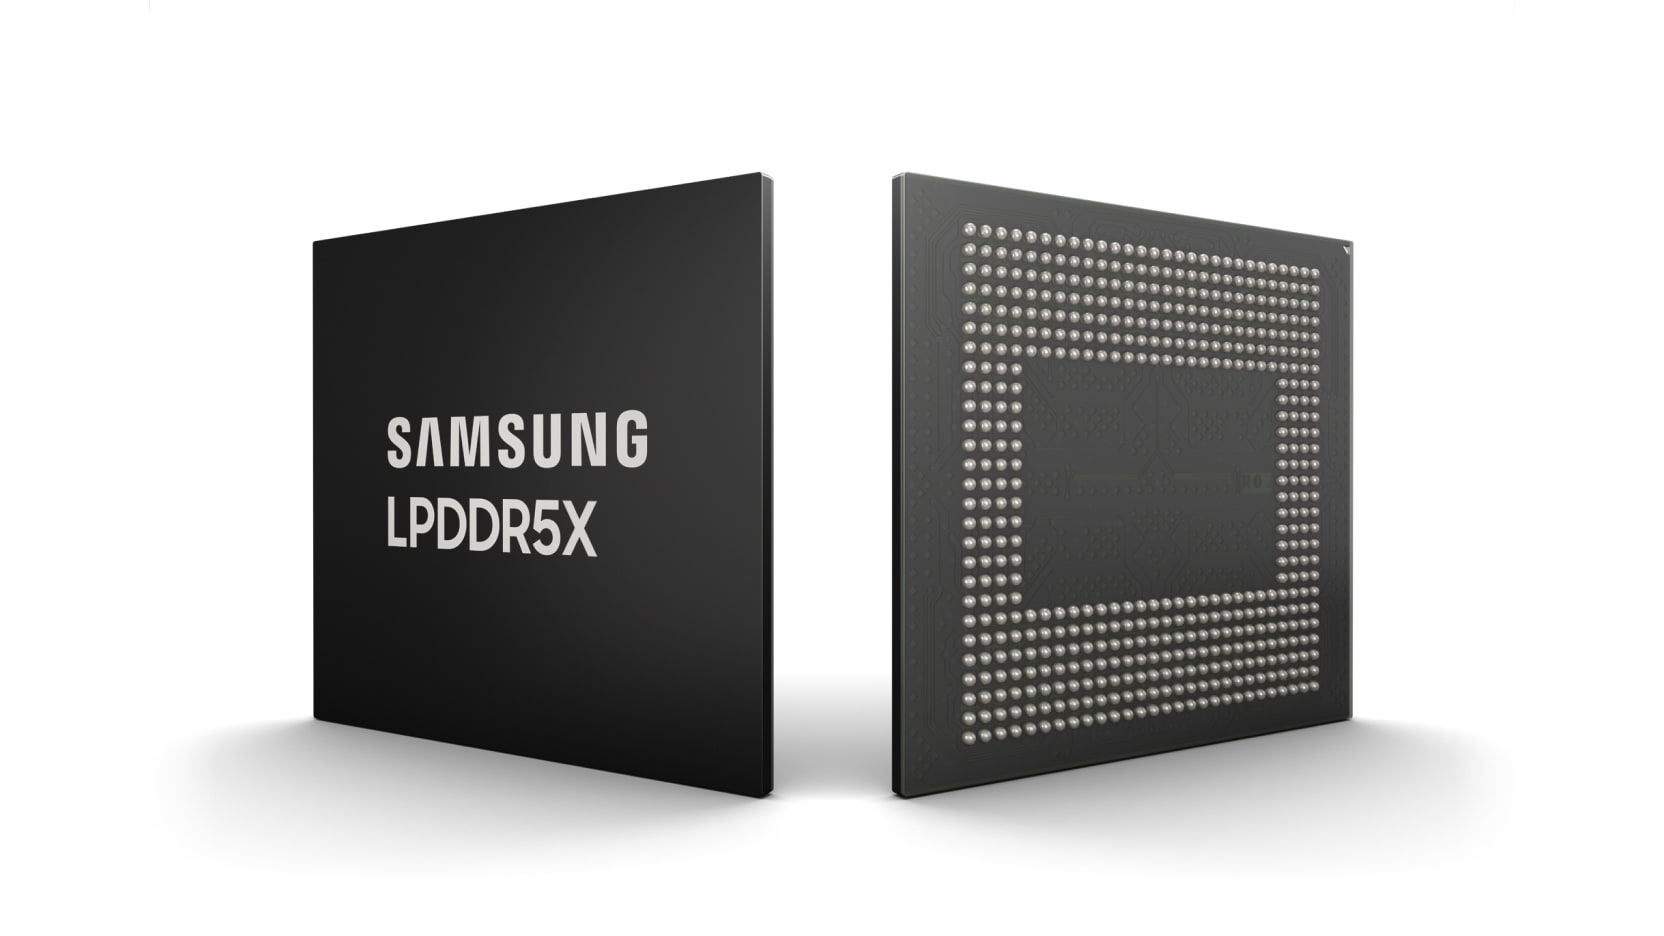 Samsung Develops Industry’s Fastest 10.7Gbps  LPDDR5X DRAM, Optimized for AI Applications